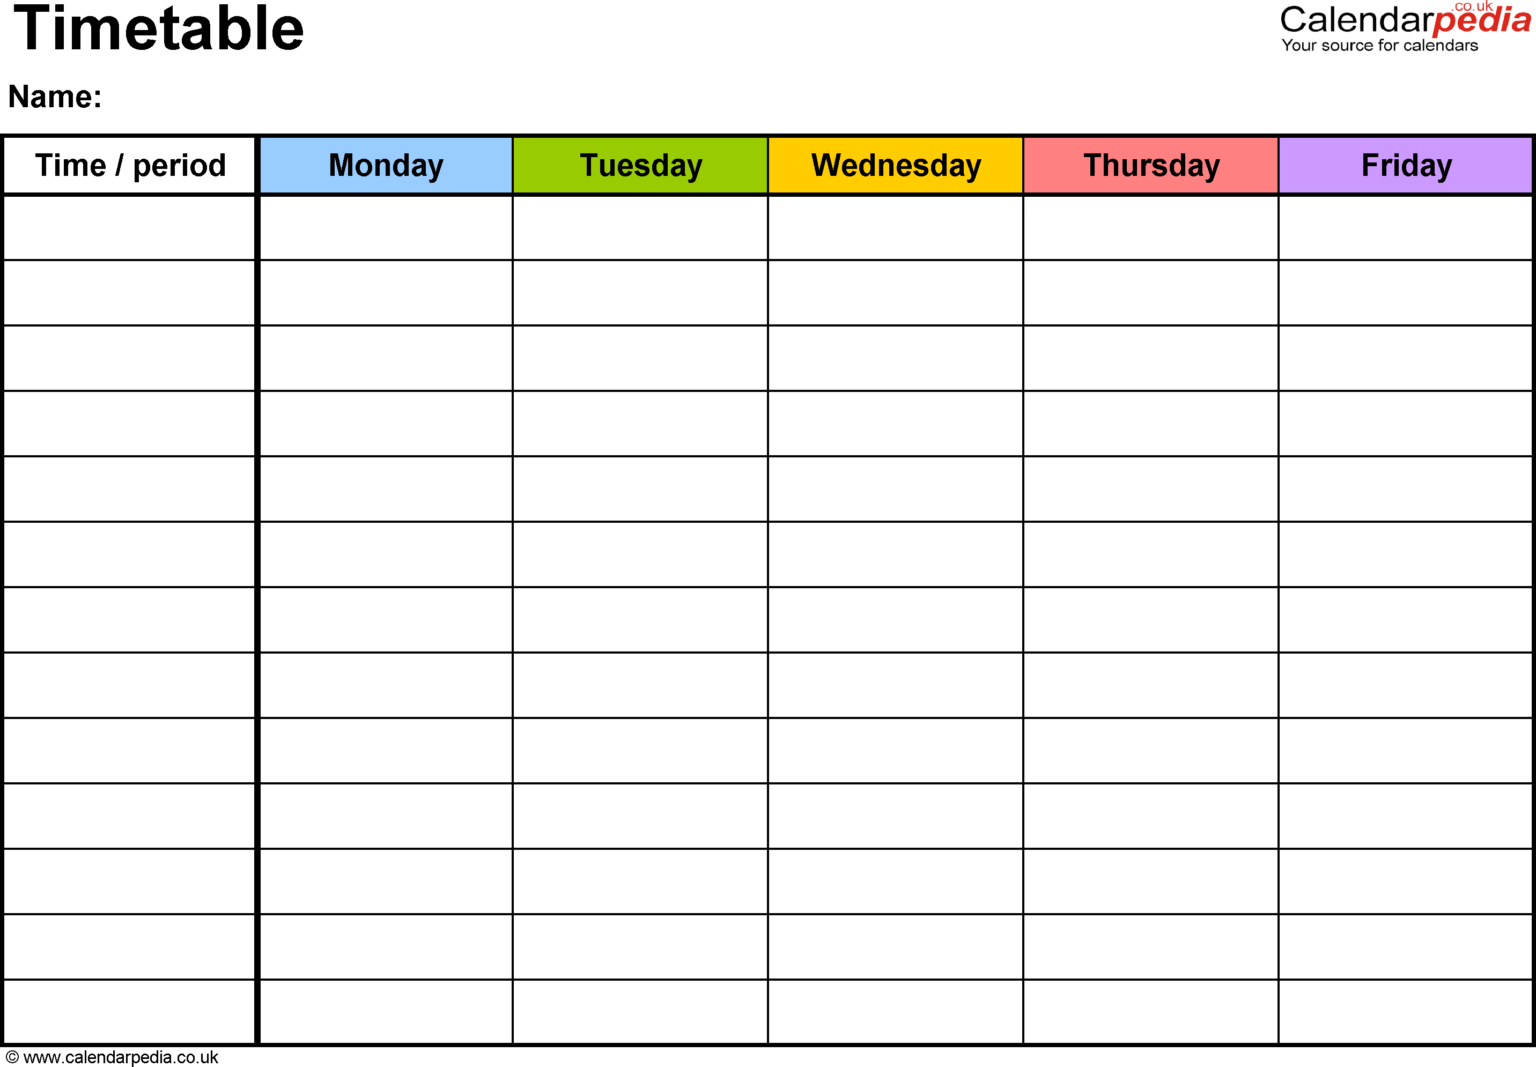 revision timetable to print